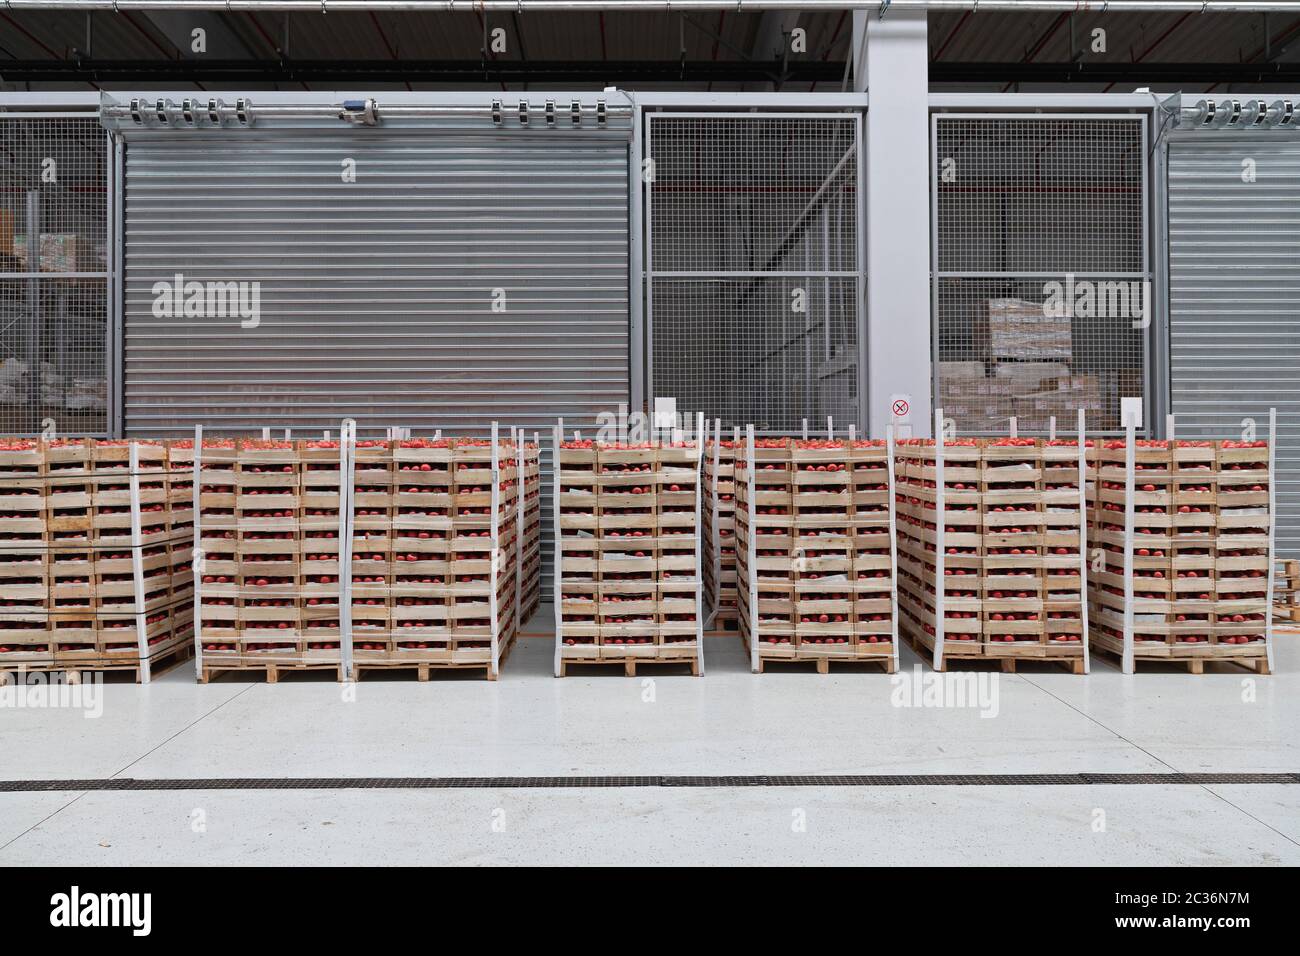 Crates of Tomatoes at Pallets in Warehouse Stock Photo